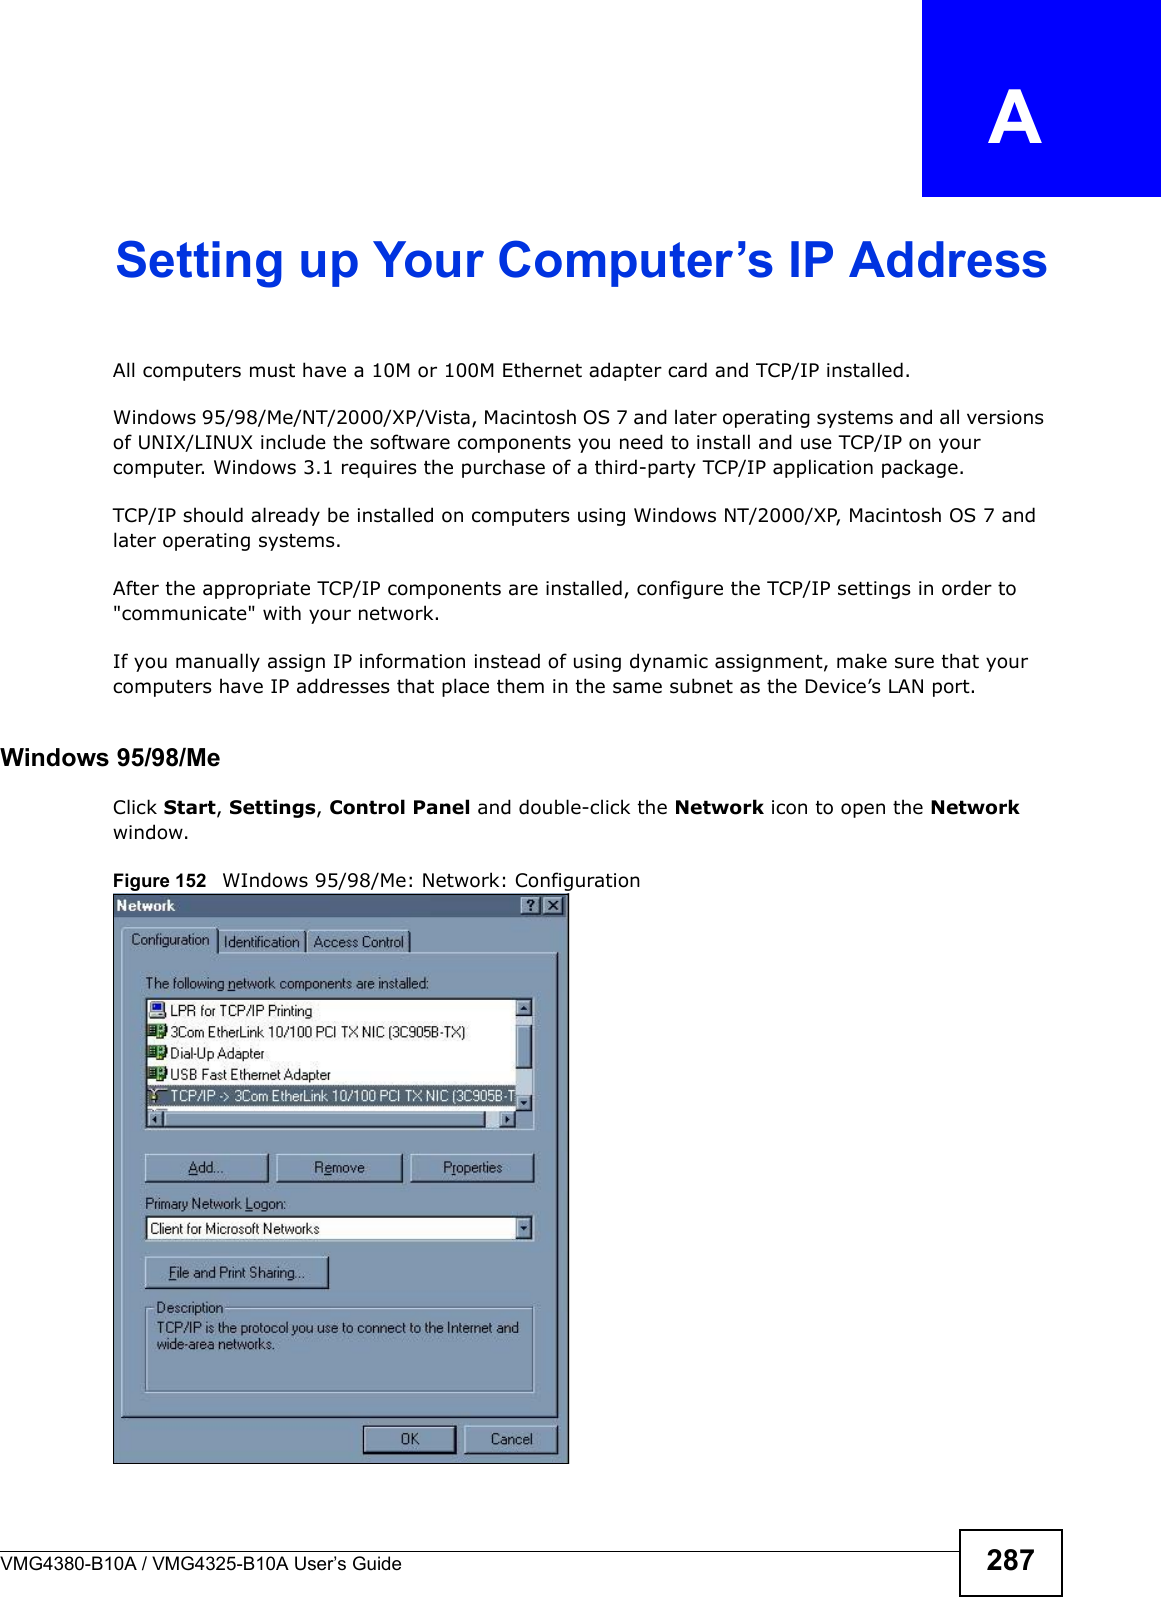 VMG4380-B10A / VMG4325-B10A User’s Guide 287APPENDIX  ASetting up Your Computer’s IP AddressAll computers must have a 10M or 100M Ethernet adapter card and TCP/IP installed. Windows 95/98/Me/NT/2000/XP/Vista, Macintosh OS 7 and later operating systems and all versions of UNIX/LINUX include the software components you need to install and use TCP/IP on your computer. Windows 3.1 requires the purchase of a third-party TCP/IP application package.TCP/IP should already be installed on computers using Windows NT/2000/XP, Macintosh OS 7 and later operating systems.After the appropriate TCP/IP components are installed, configure the TCP/IP settings in order to &quot;communicate&quot; with your network. If you manually assign IP information instead of using dynamic assignment, make sure that your computers have IP addresses that place them in the same subnet as the Device’s LAN port.Windows 95/98/MeClick Start, Settings, Control Panel and double-click the Network icon to open the Network window.Figure 152  WIndows 95/98/Me: Network: Configuration